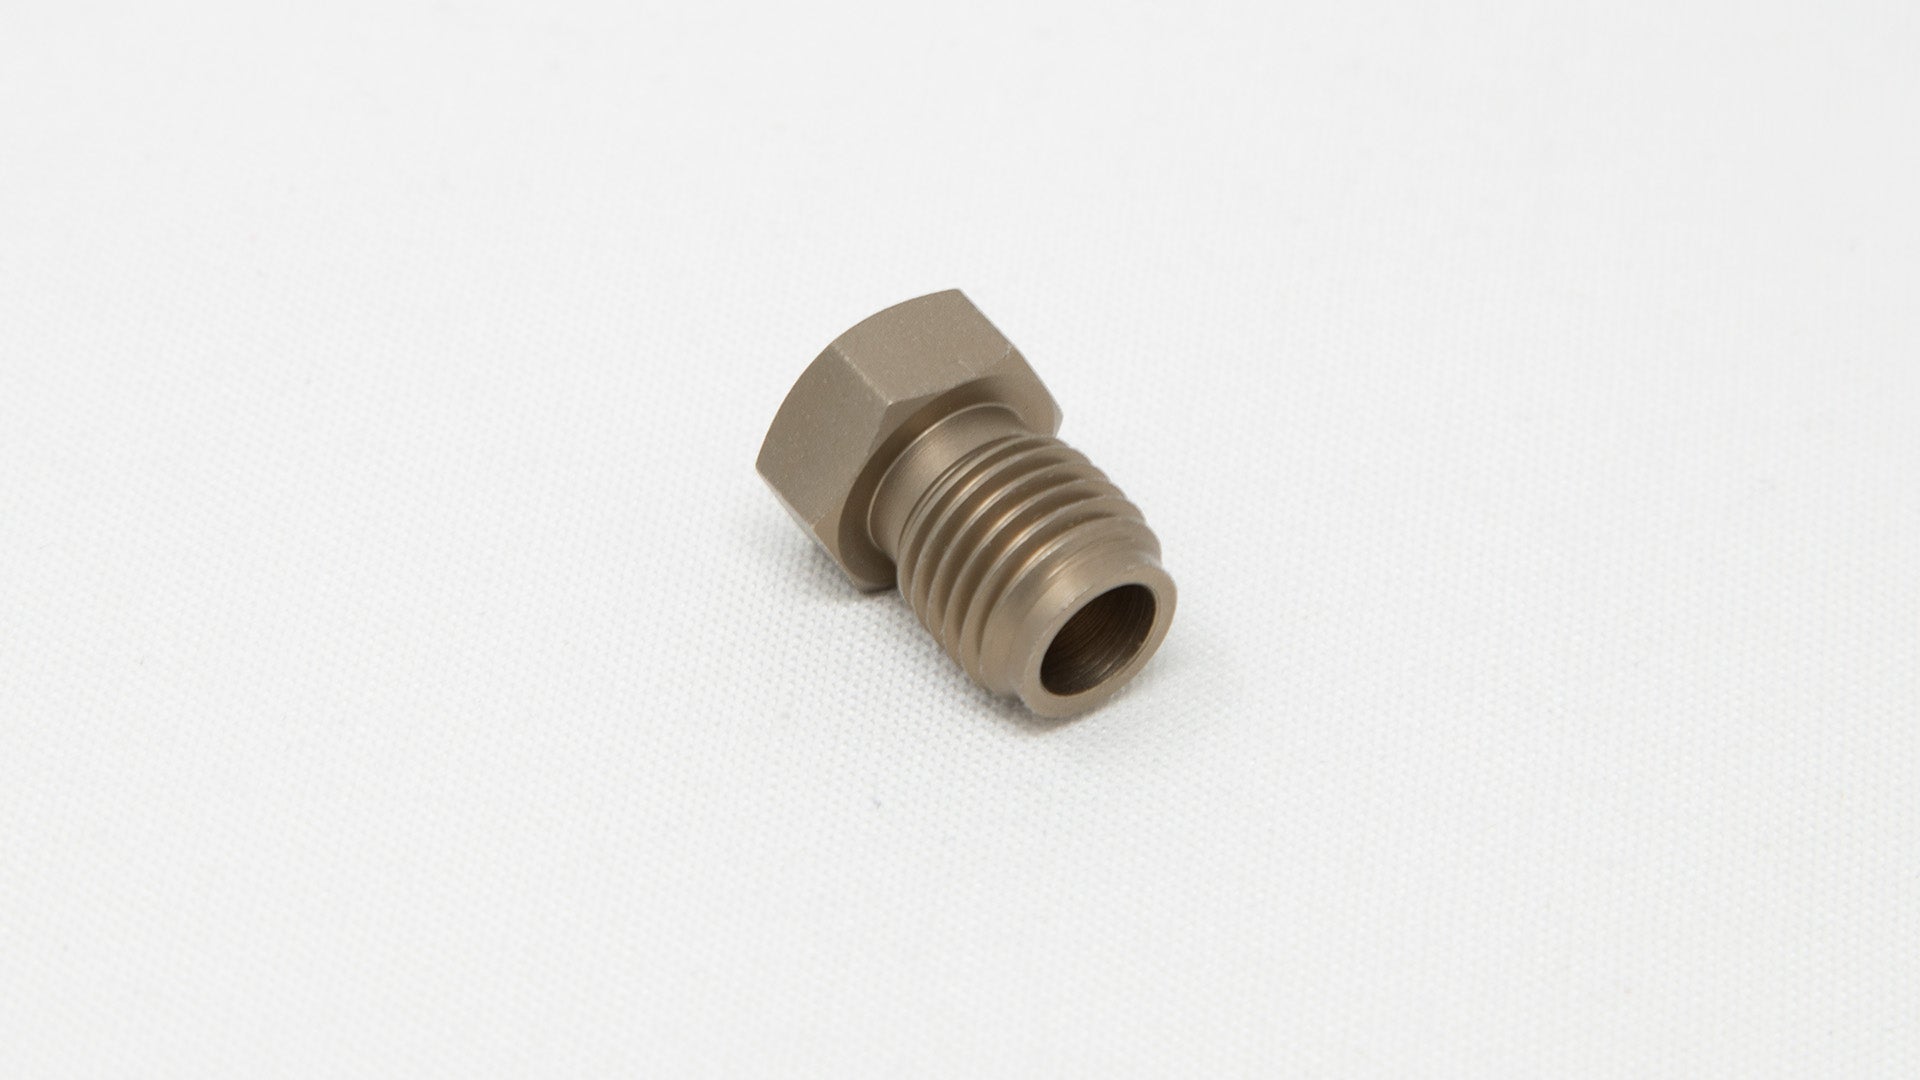 Nut with pass-through hole and threads on one end.